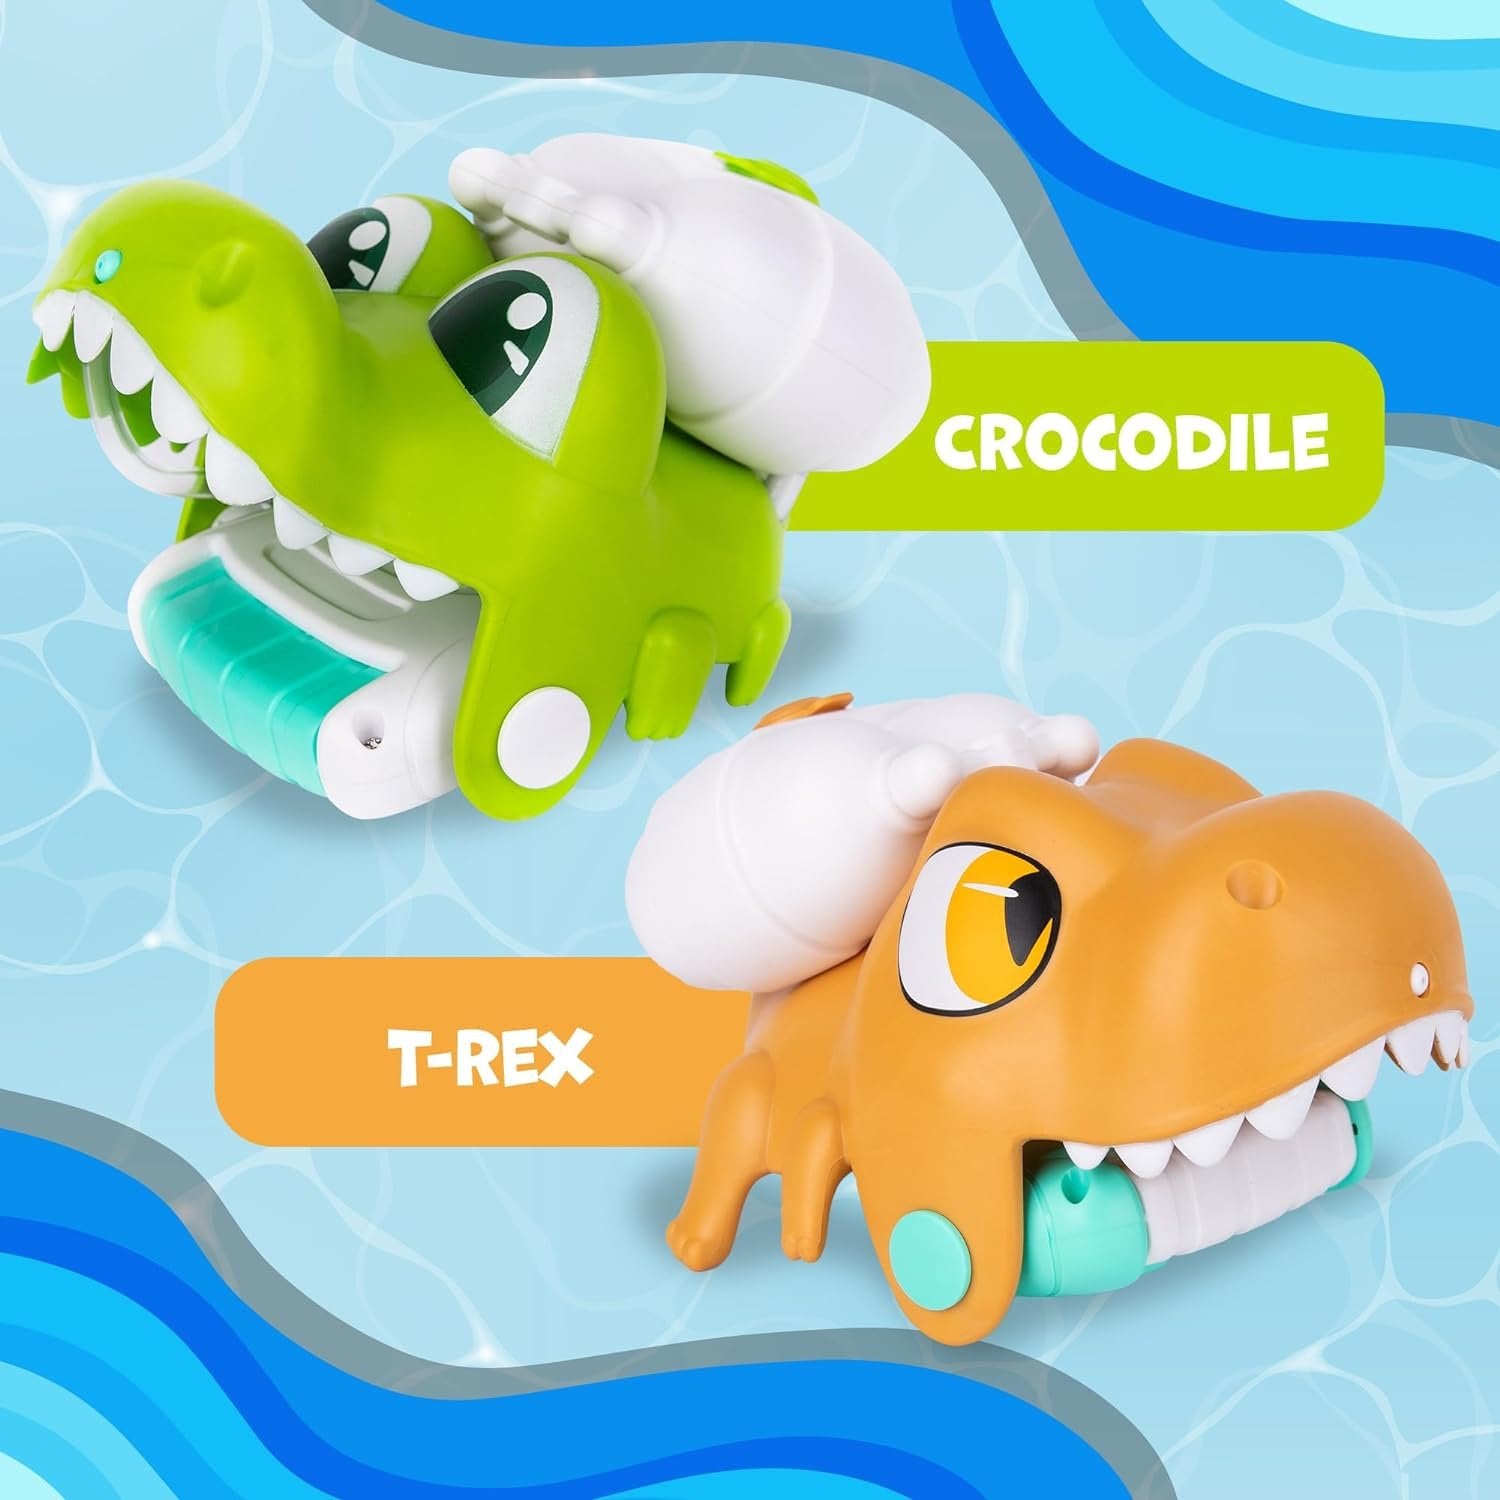 Squirt Toy Wrist Gun - Set of 2 Animal Water Guns - Small Water Guns for Kids - 1 Crocodile and 1 T-Rex Design - Water Squirt Toy for Kids - Squirt Guns for Bath or Outdoor Summer Fun